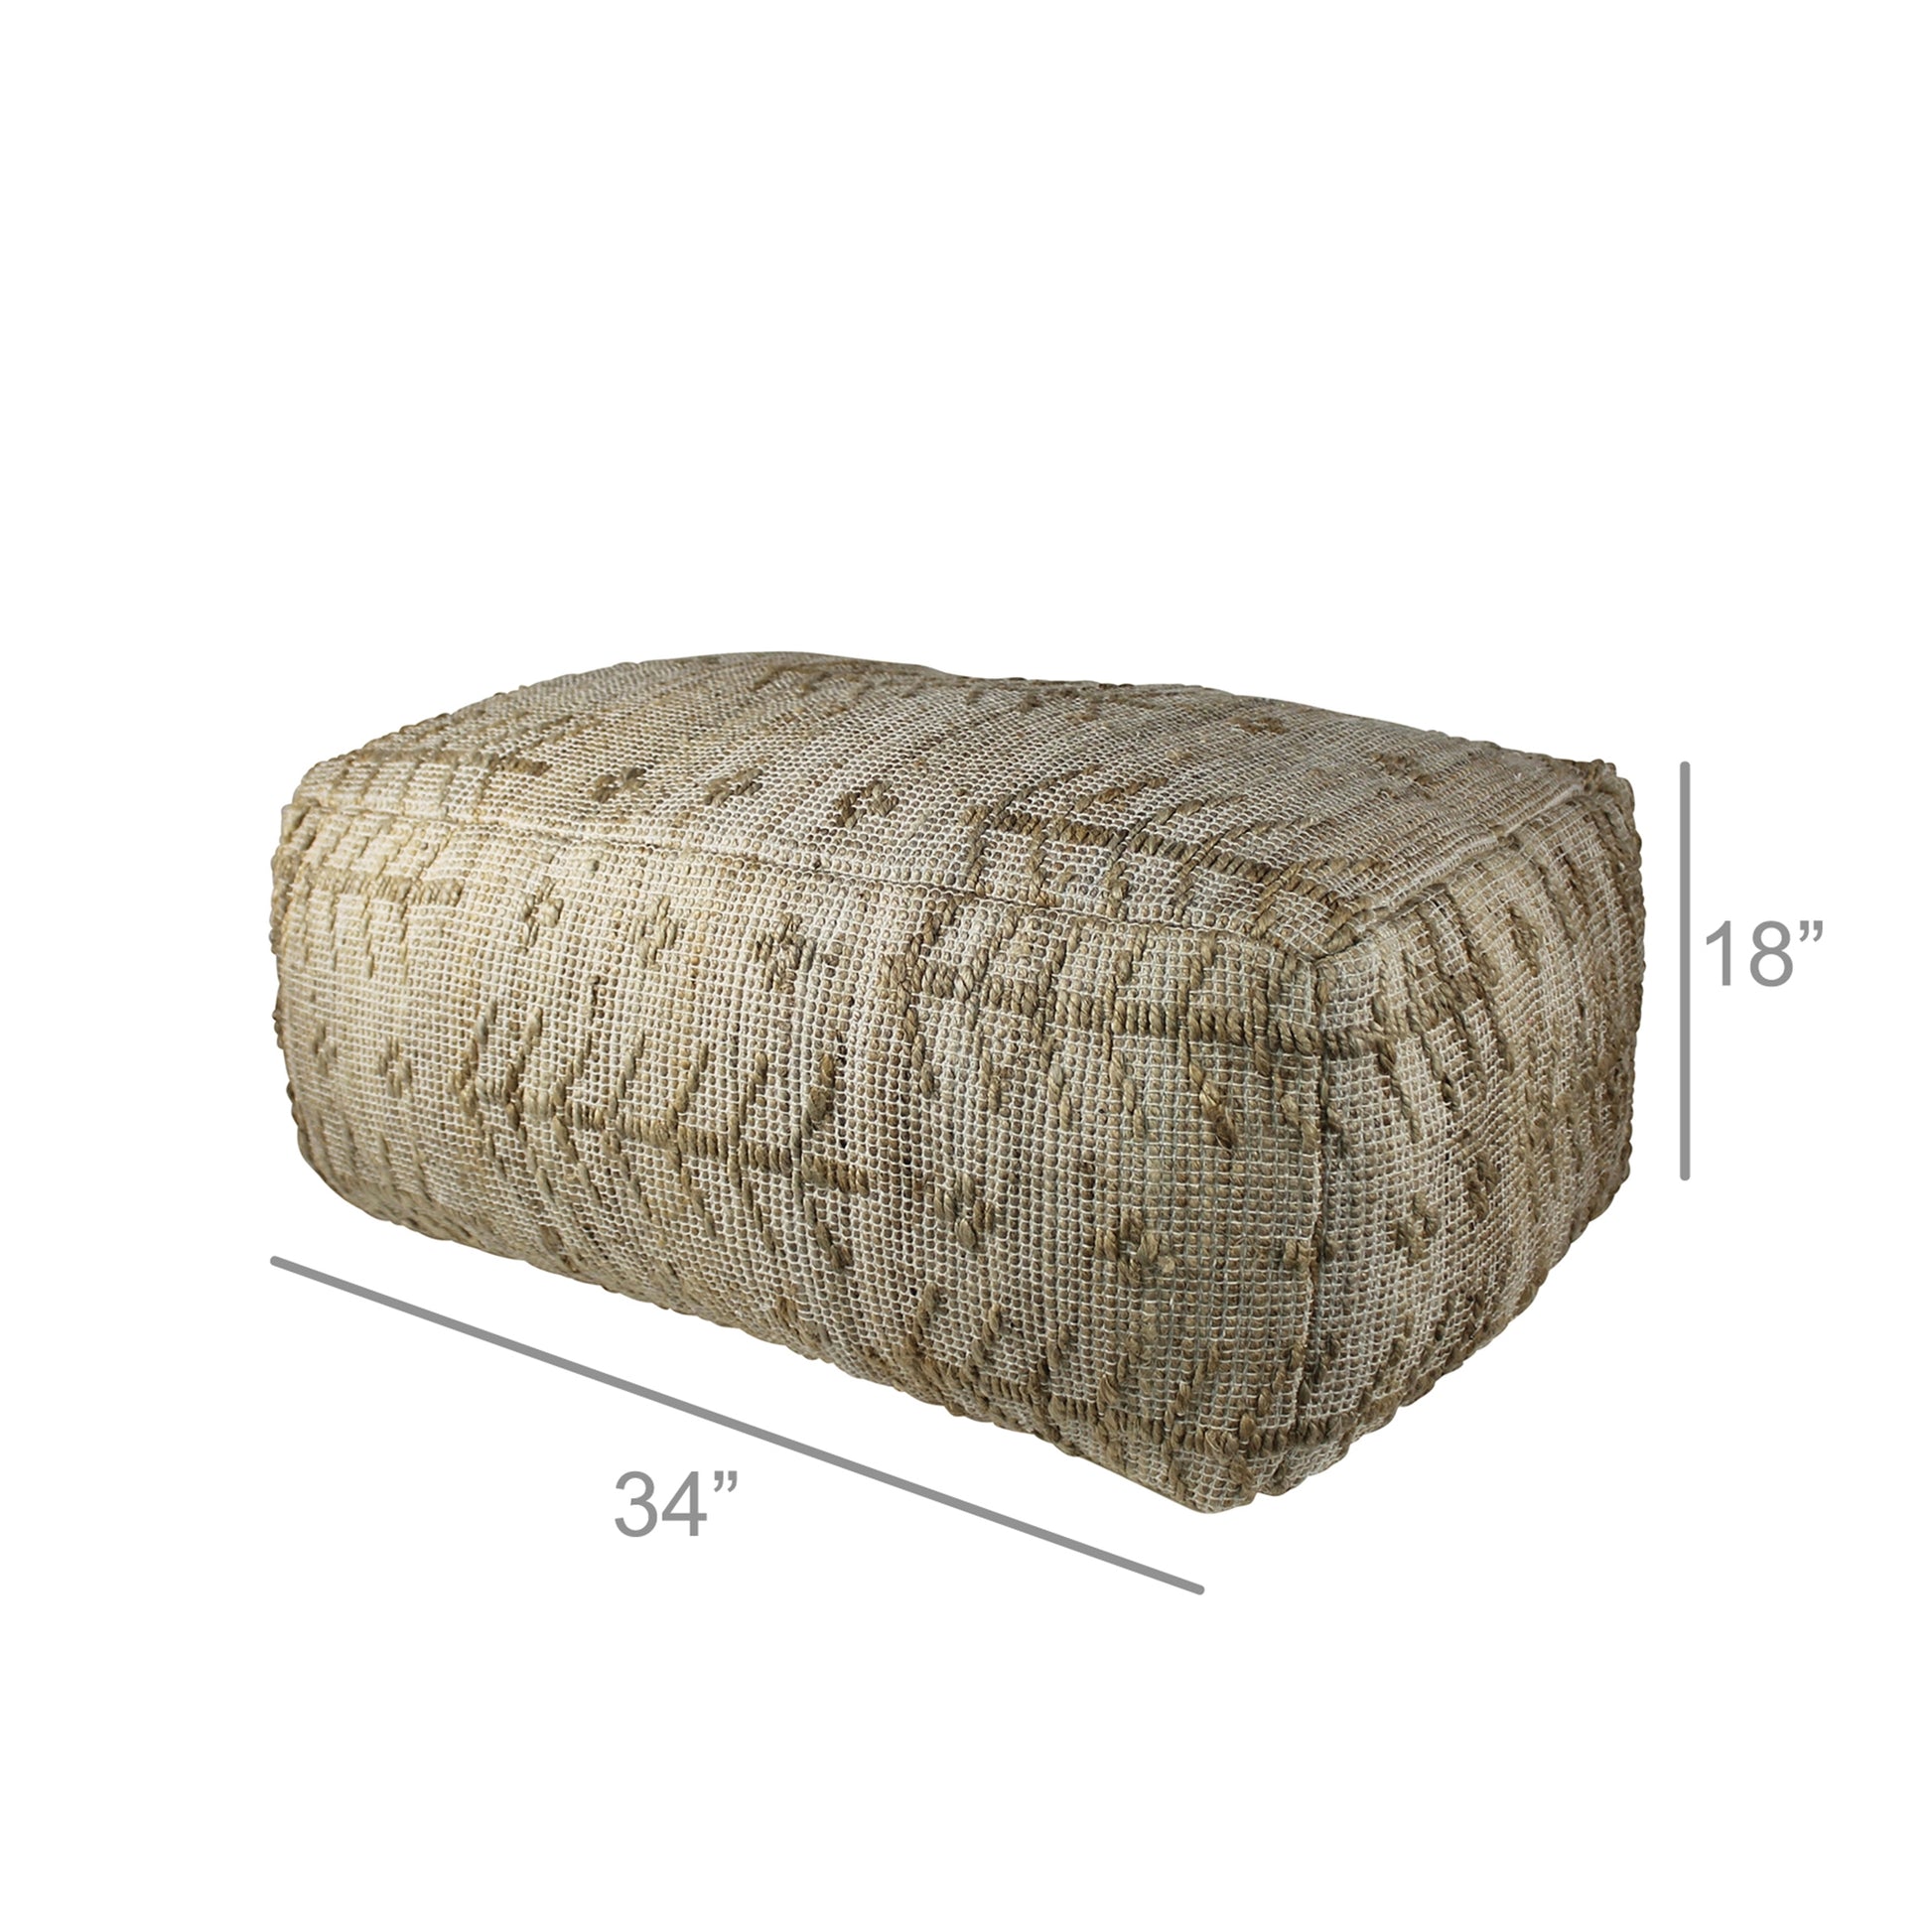 natural color hemp and cotton ottoman pouf with white background with dimensions